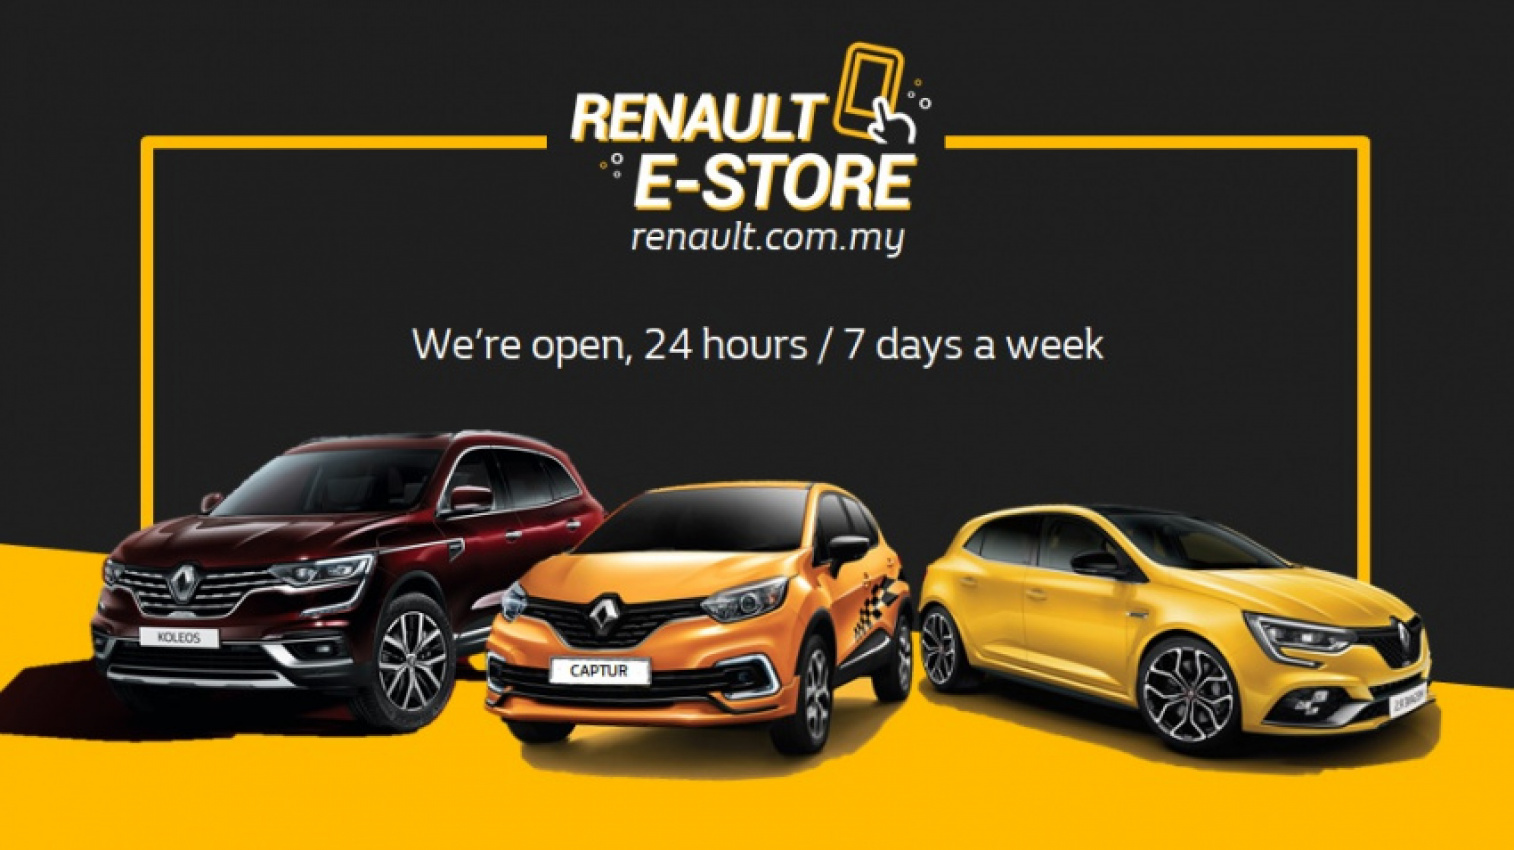 autos, car brands, cars, renault, automotive, cars, crossover, hatchback, malaysia, tc euro cars, renault e-store offers digital buying and subscription experience to malaysians